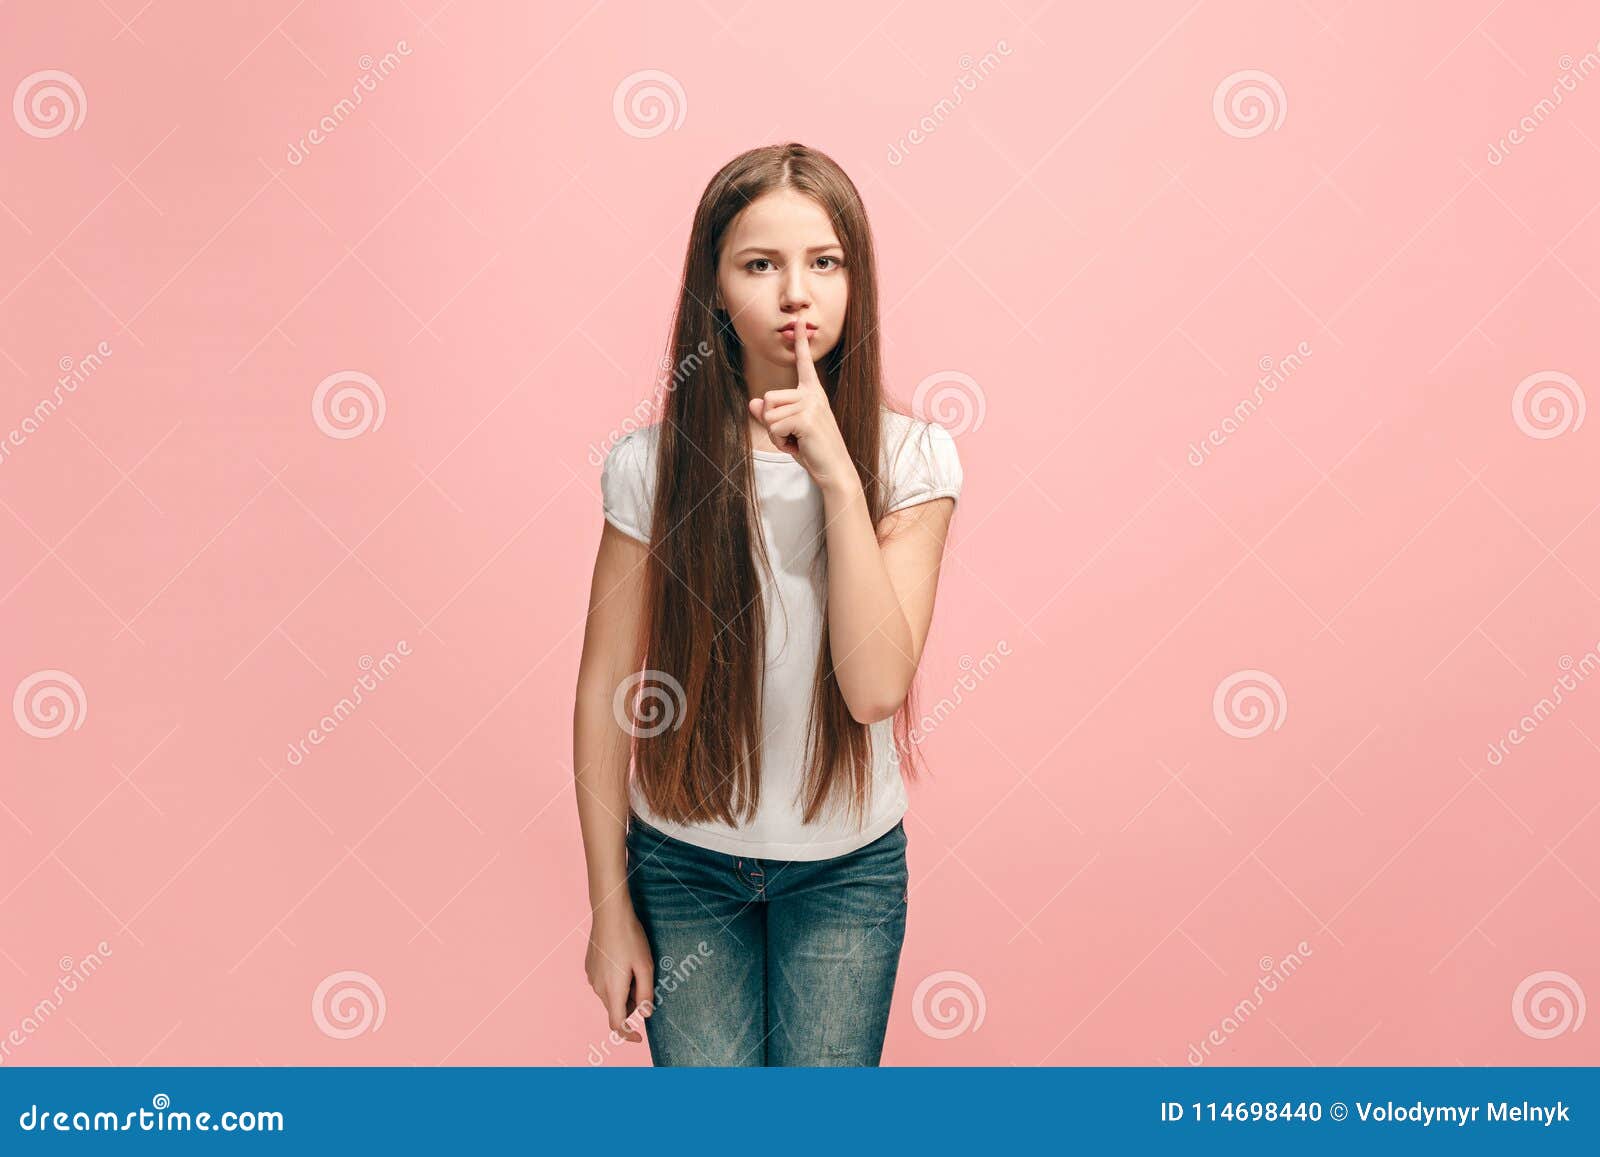 Pink Small Teen